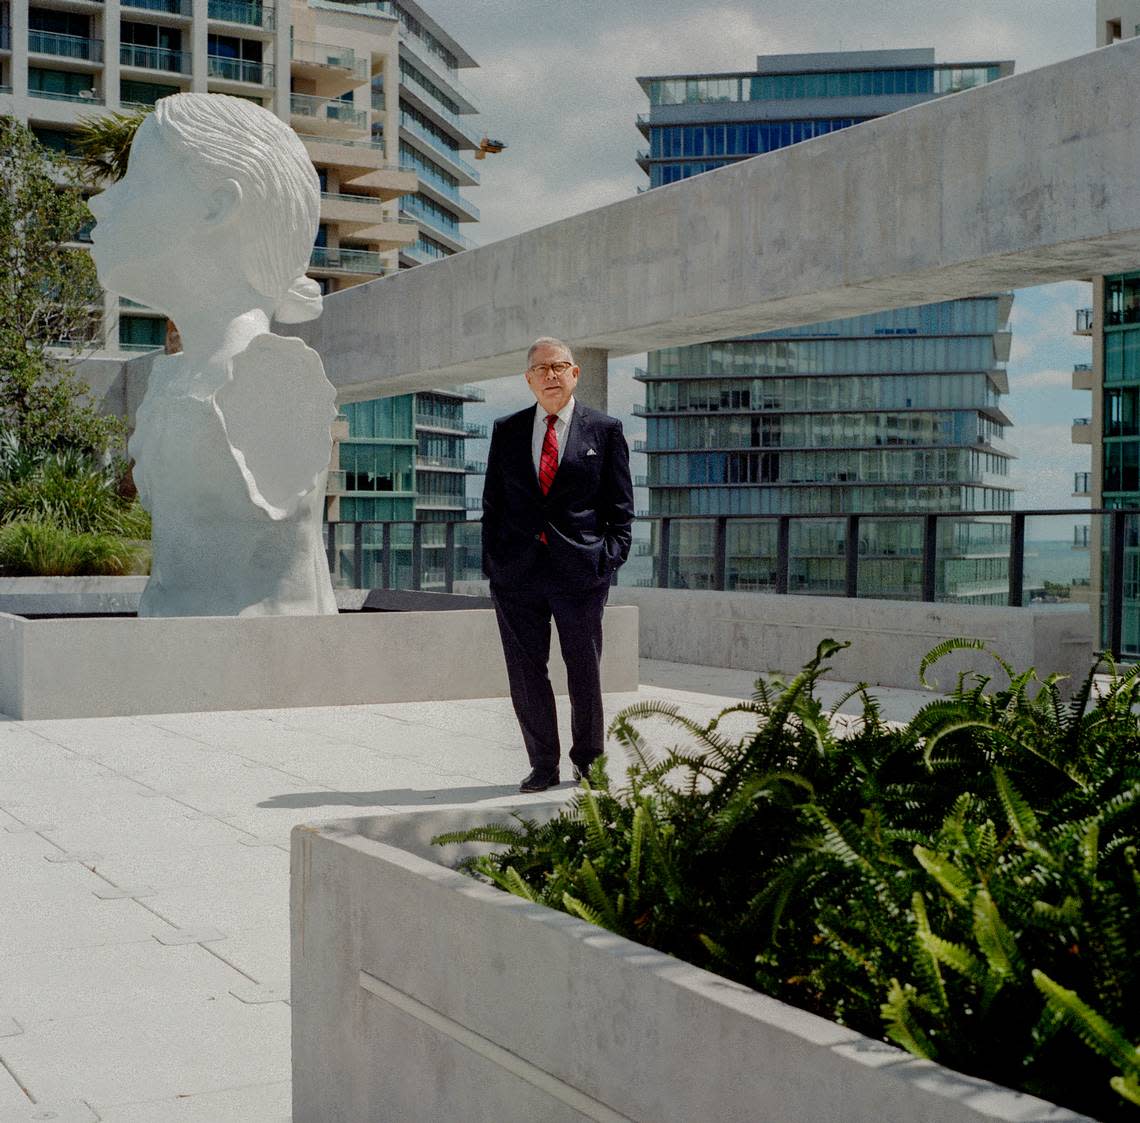 Alberto Ibargüen standing next to “The Well” by Enrique Martinez Celaya, on the rooftop sculpture garden in Coconut Grove, Florida, where the Knight Foundation offices are located.